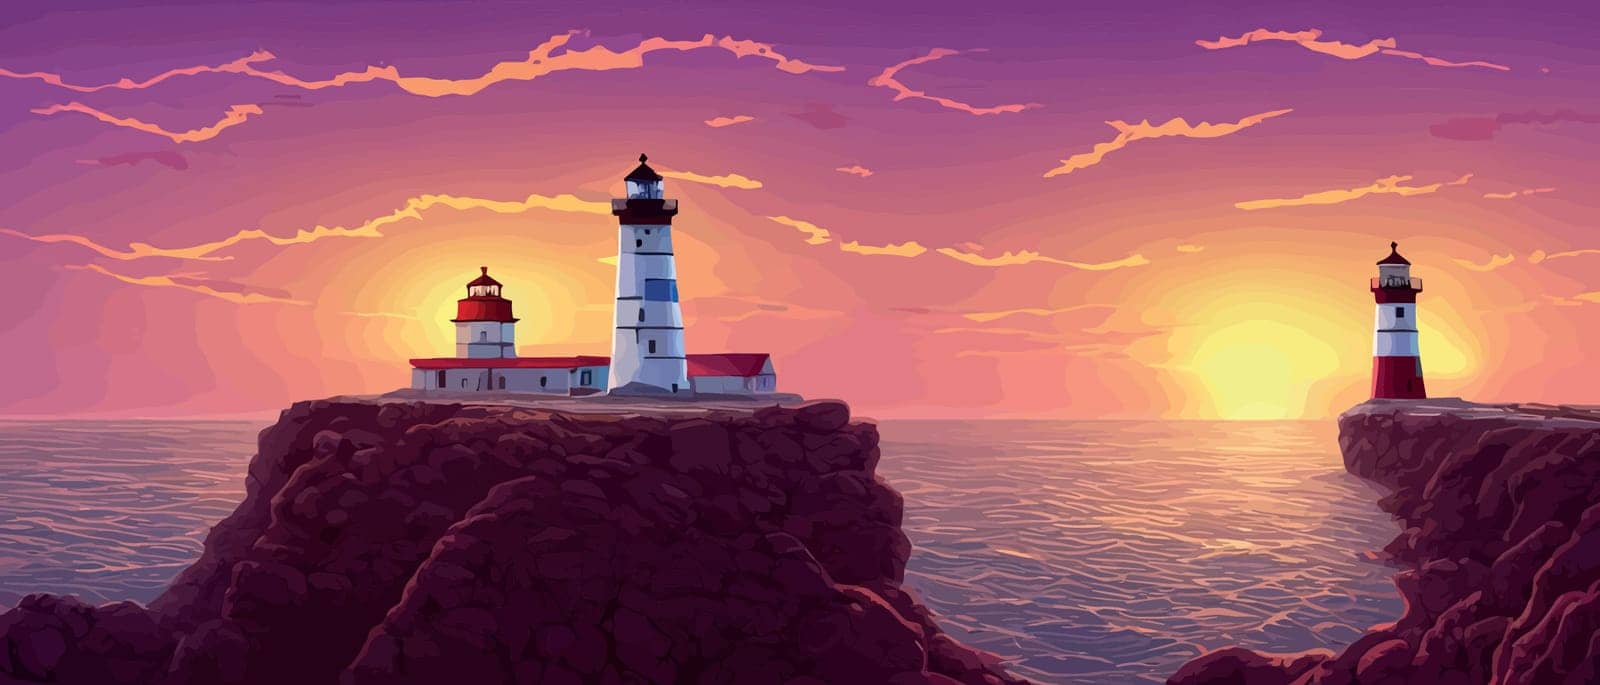 Illumination from the lighthouse from mainland, moon on background or sunset, vector background, vector drawing by hand and digital illustration, created without a reference image.